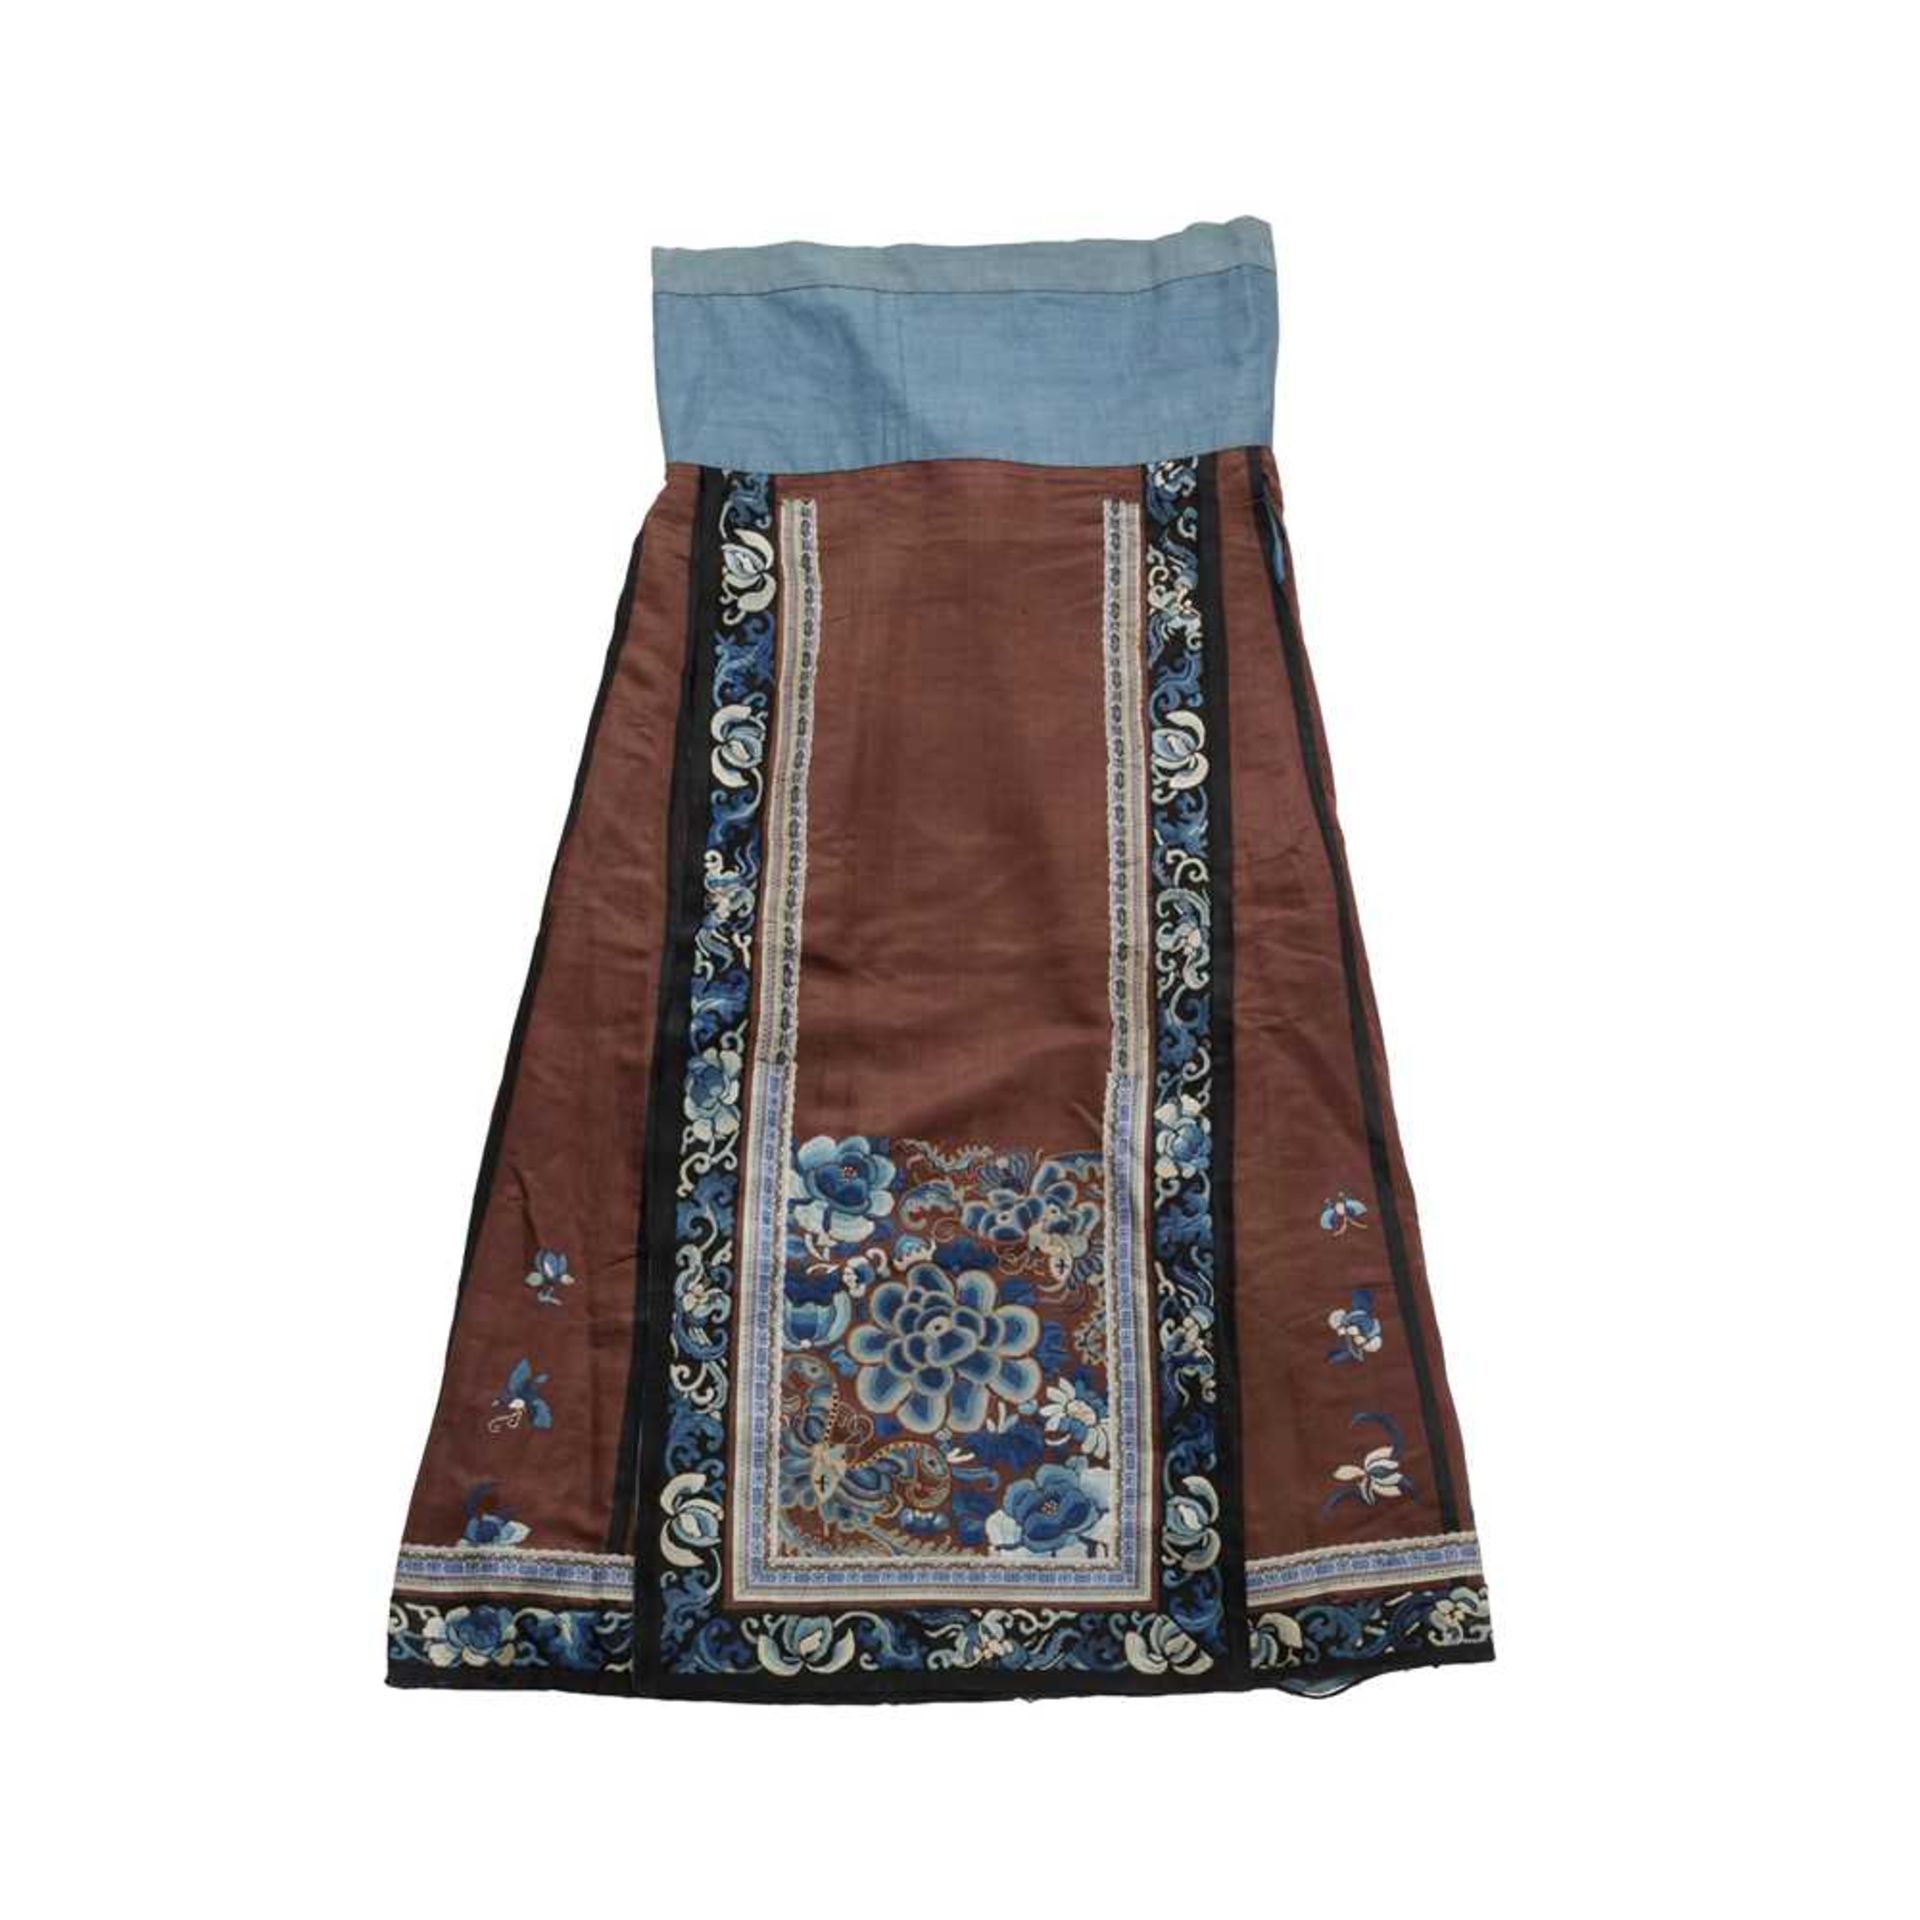 HAN CHINESE WOMAN'S EMBROIDERED PERSIMMON SILK PLEATED SKIRT LATE QING DYNASTY-REPUBLIC PERIOD, 19TH